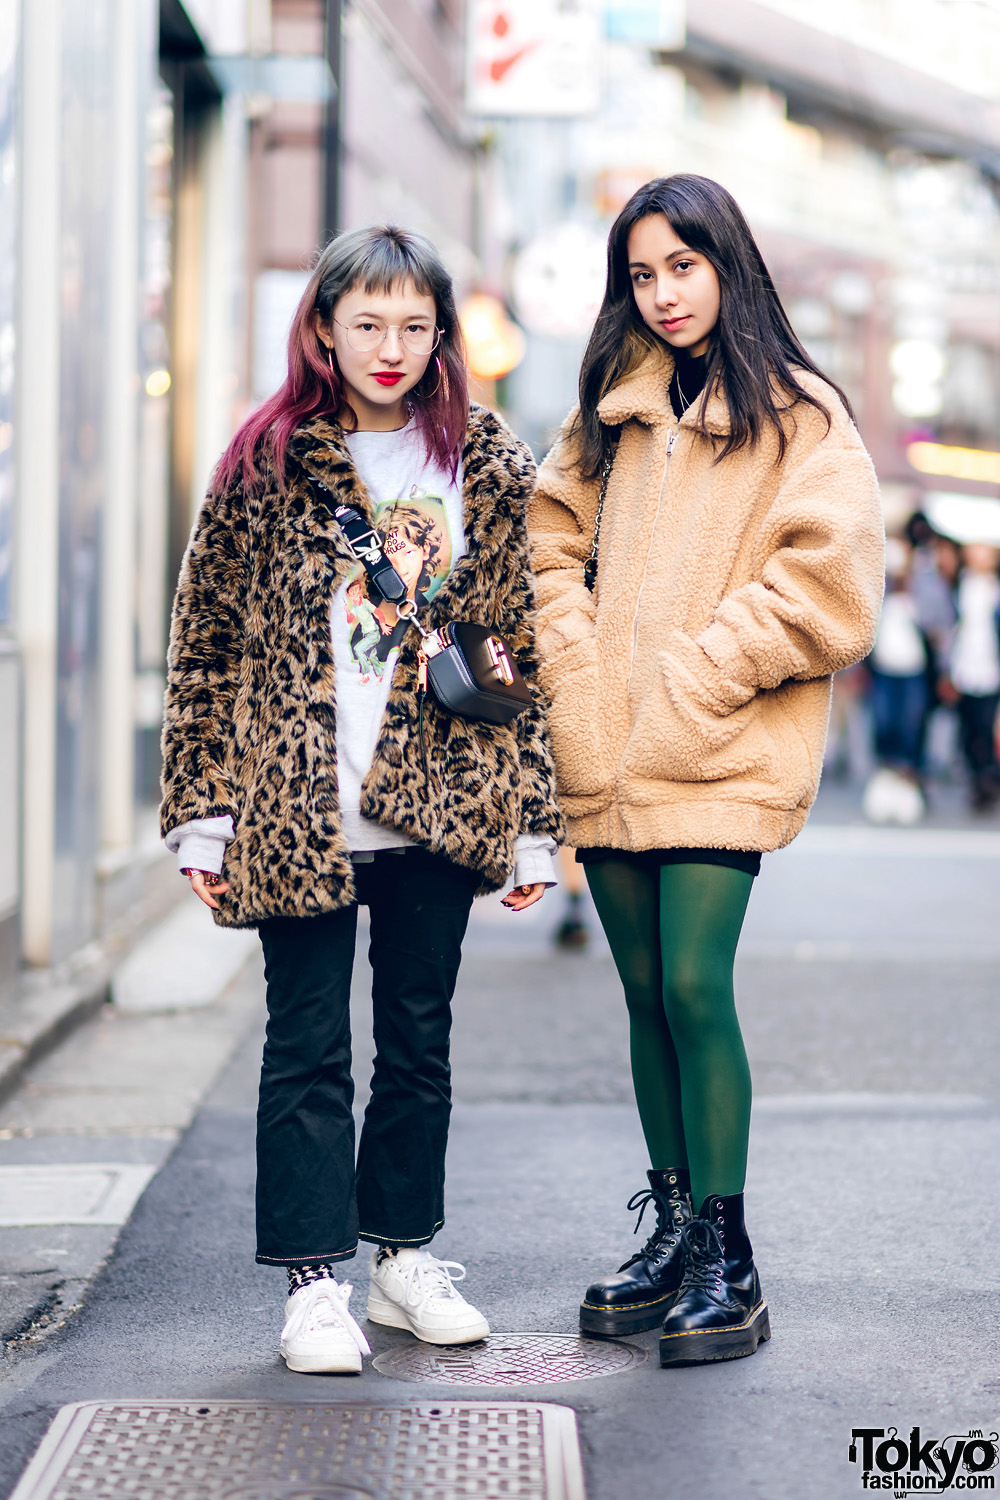 Harajuku Girls on the Street w/ H&M Leopard Coat, IAmGia Shearling Jacket, Fucking Awesome Sweater, Marc Jacobs, Brandy Melville, Nike & Dr. Martens